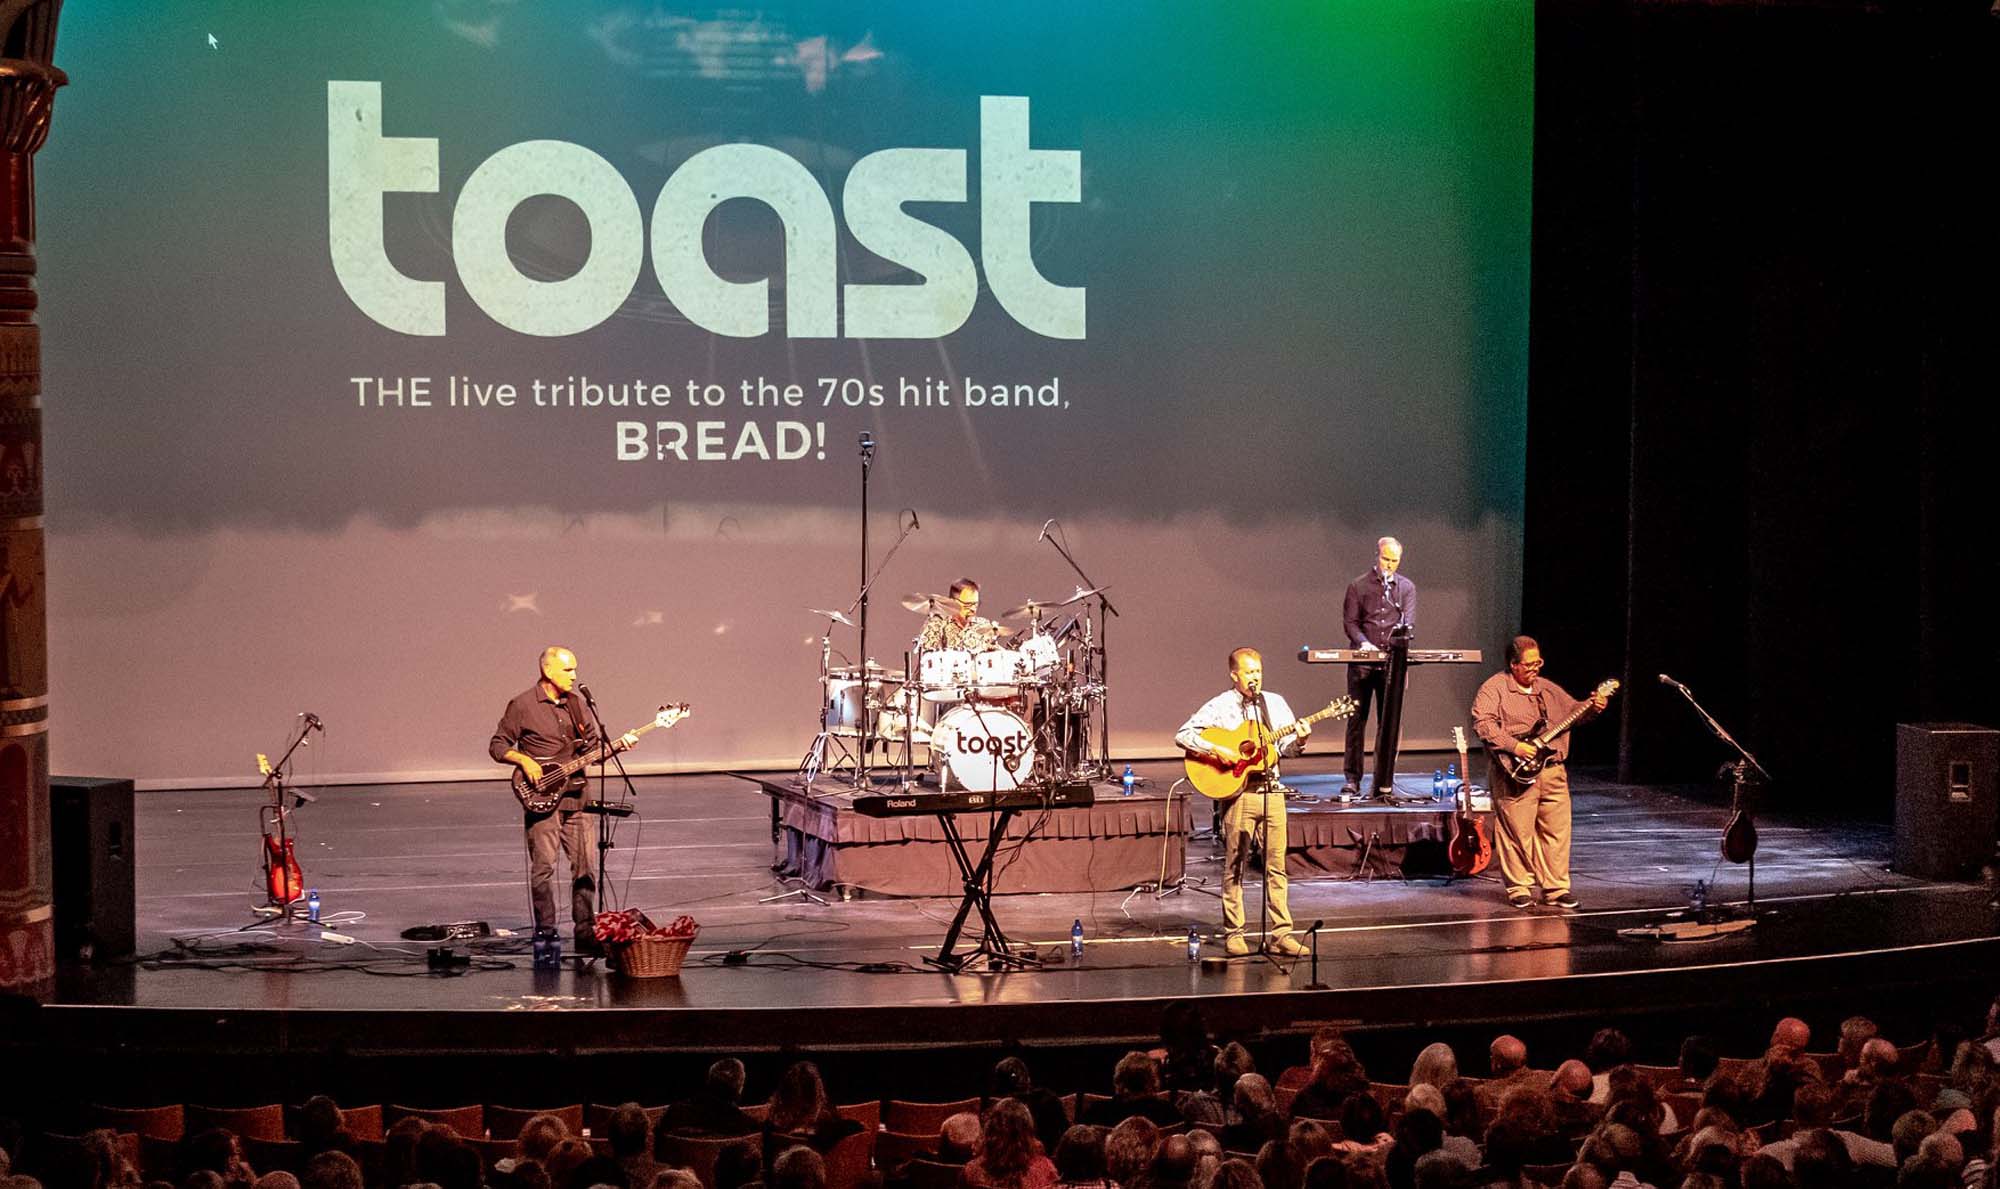 Toast Bread Cover Band performing live